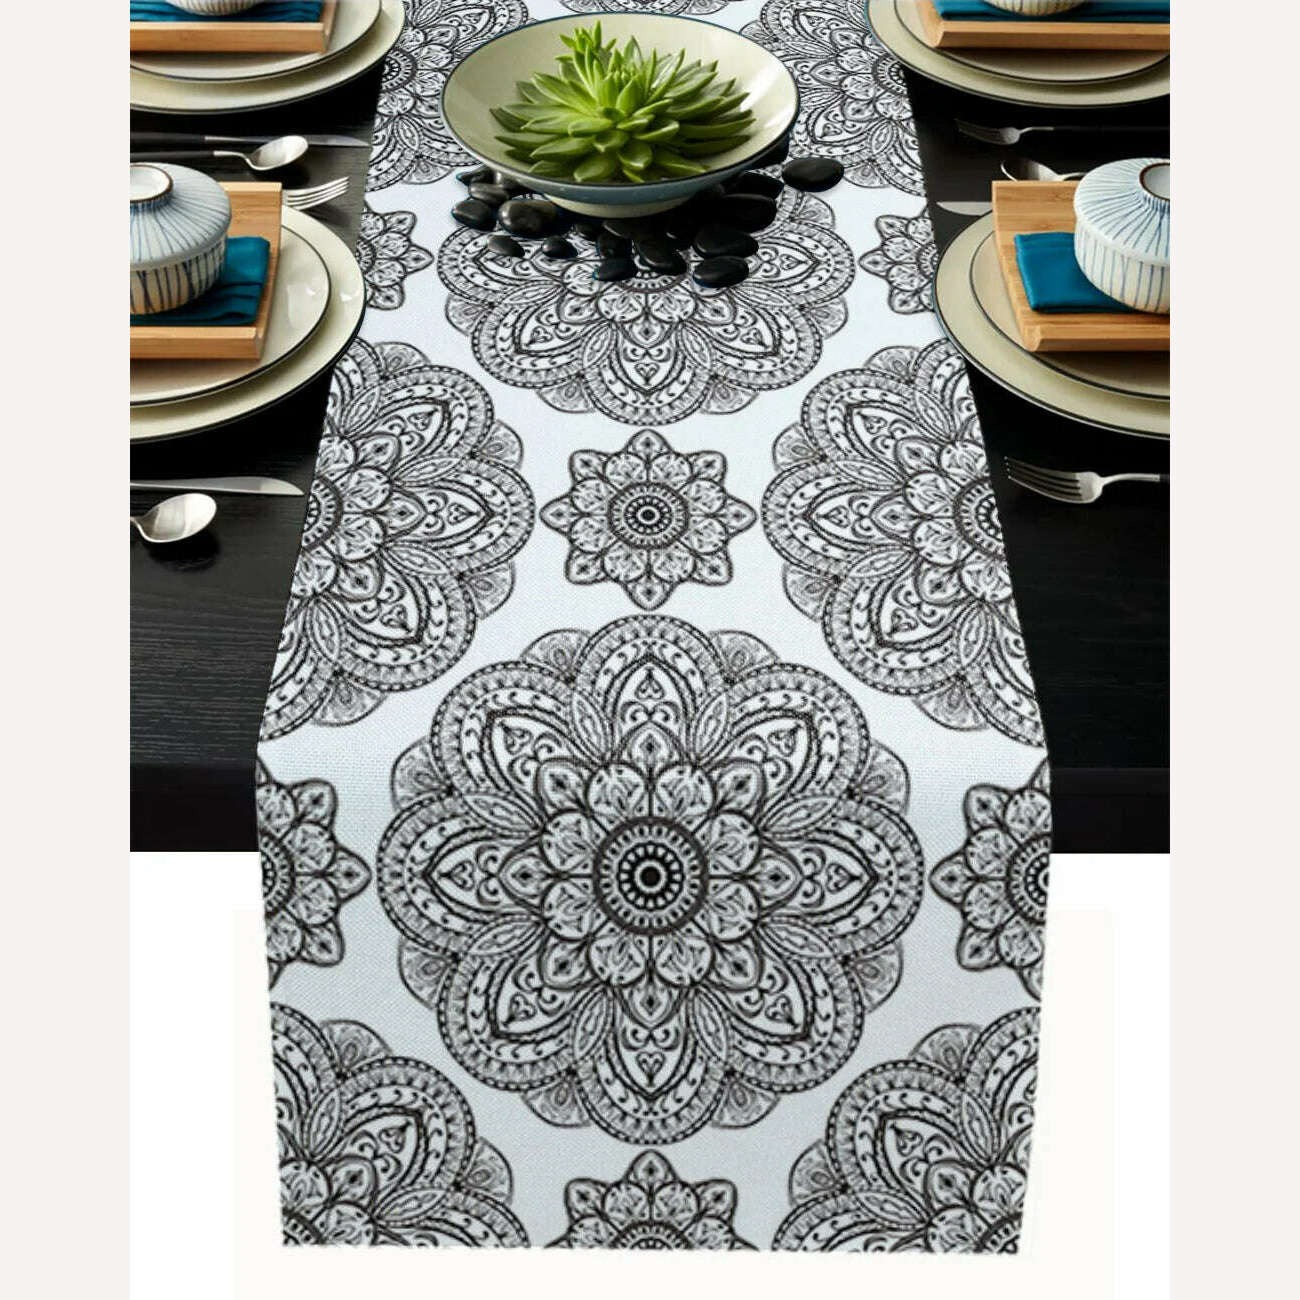 KIMLUD, Linen Burlap Table Runner Colorful Morocco Flowers Islam Arabesque Kitchen Table Runners Dinner Party Wedding Events Decor, LEX01528 / 180x33cm70x13inch, KIMLUD Womens Clothes